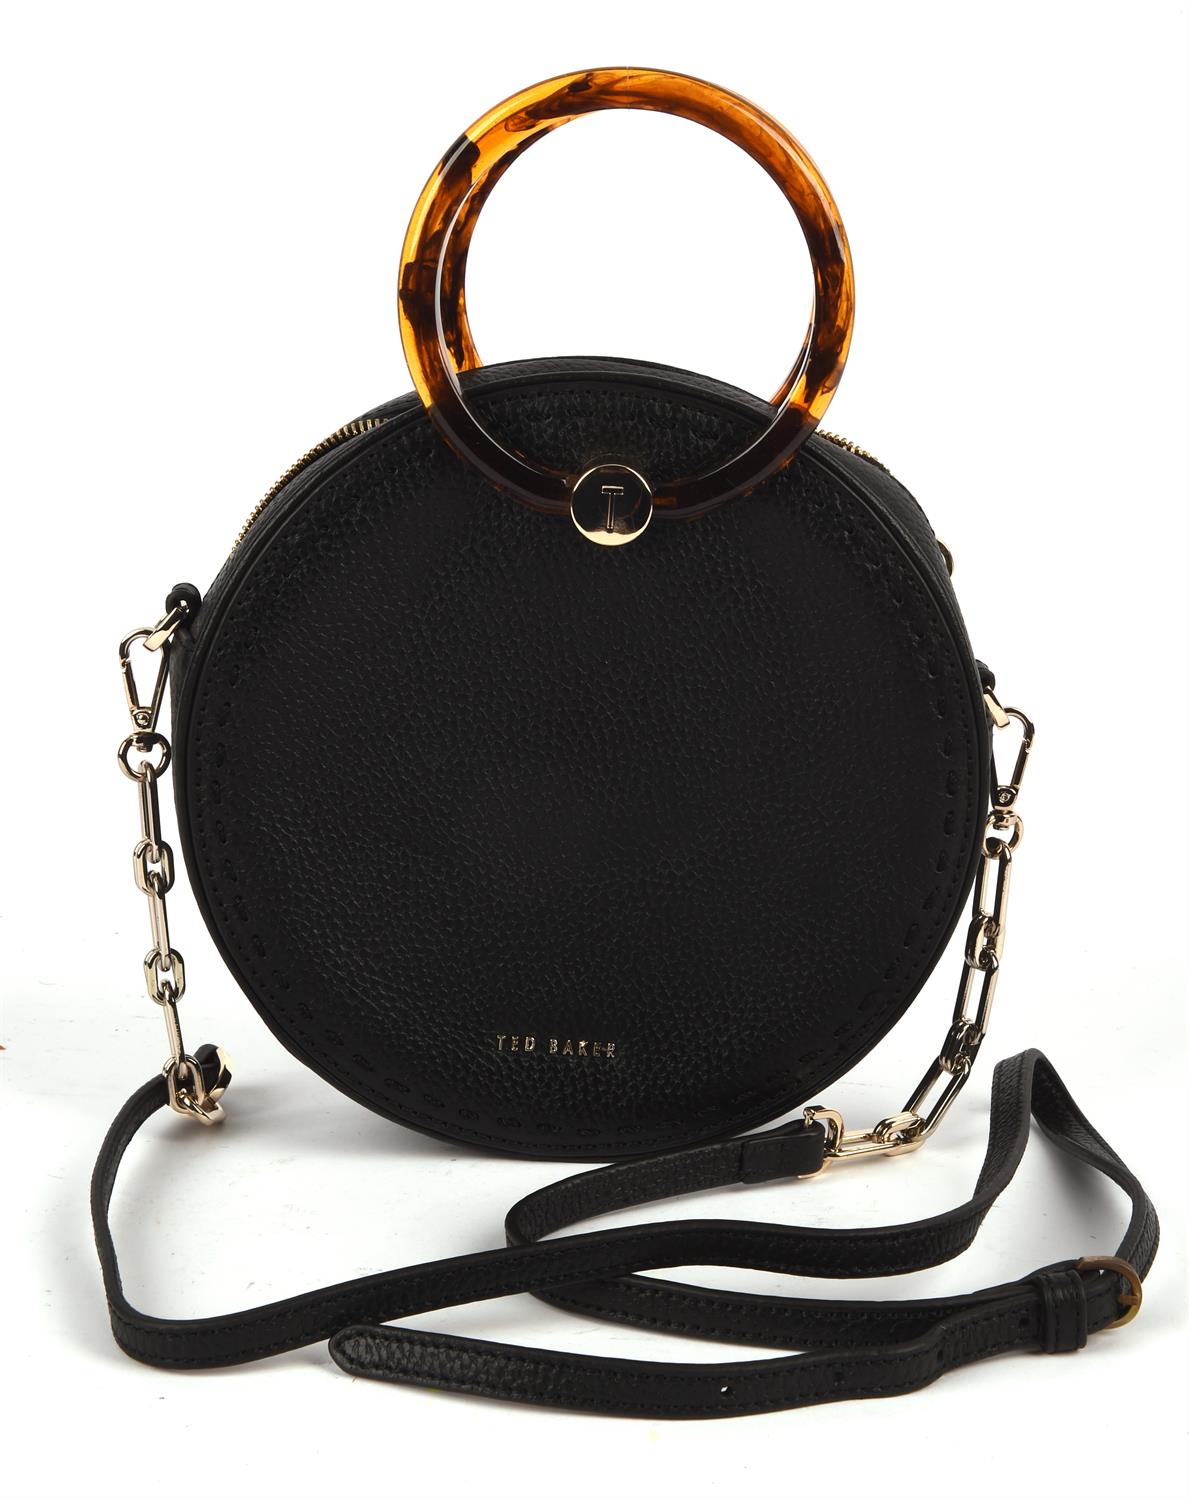 TED BAKER round black grained leather cross body handbag with brown Perspex tortoiseshell coloured - Image 2 of 5